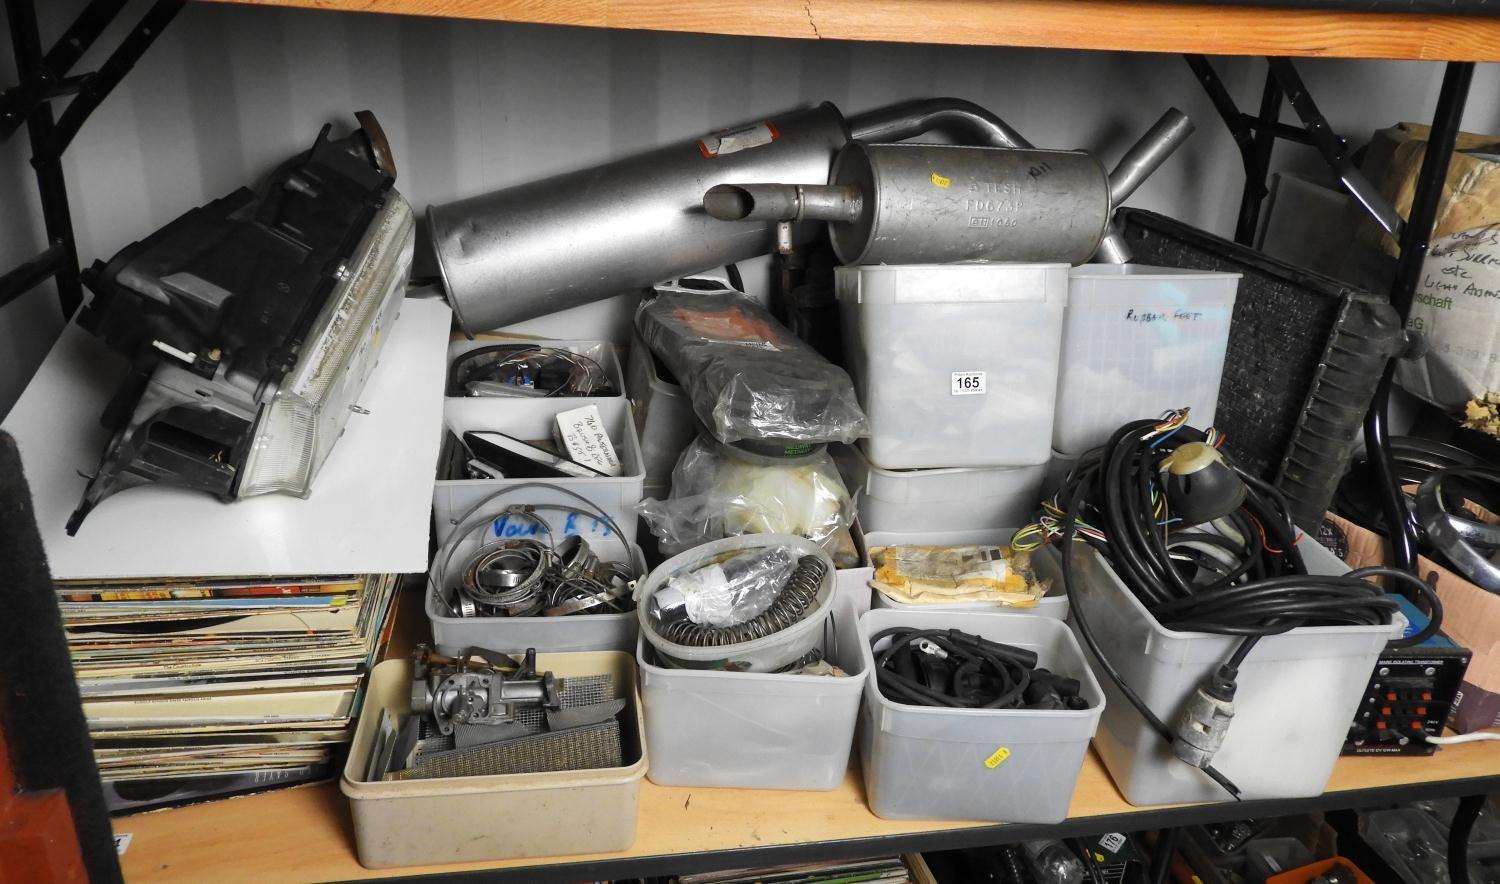 Large Quantity of Old Car Parts